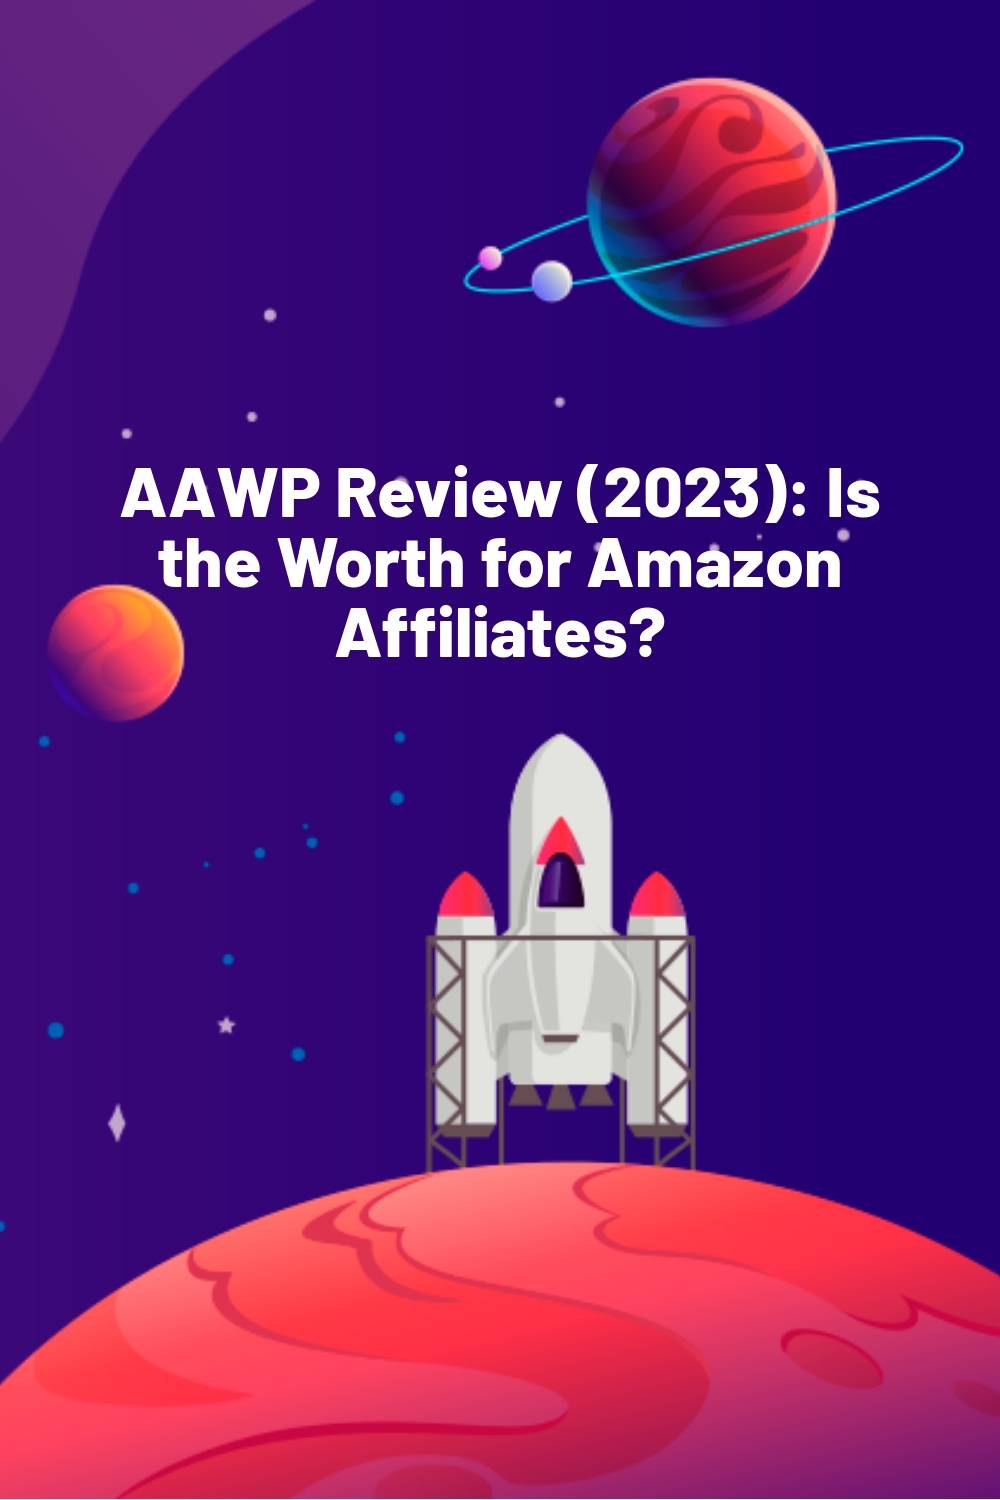 AAWP Review (2023): Is the Worth for Amazon Affiliates?